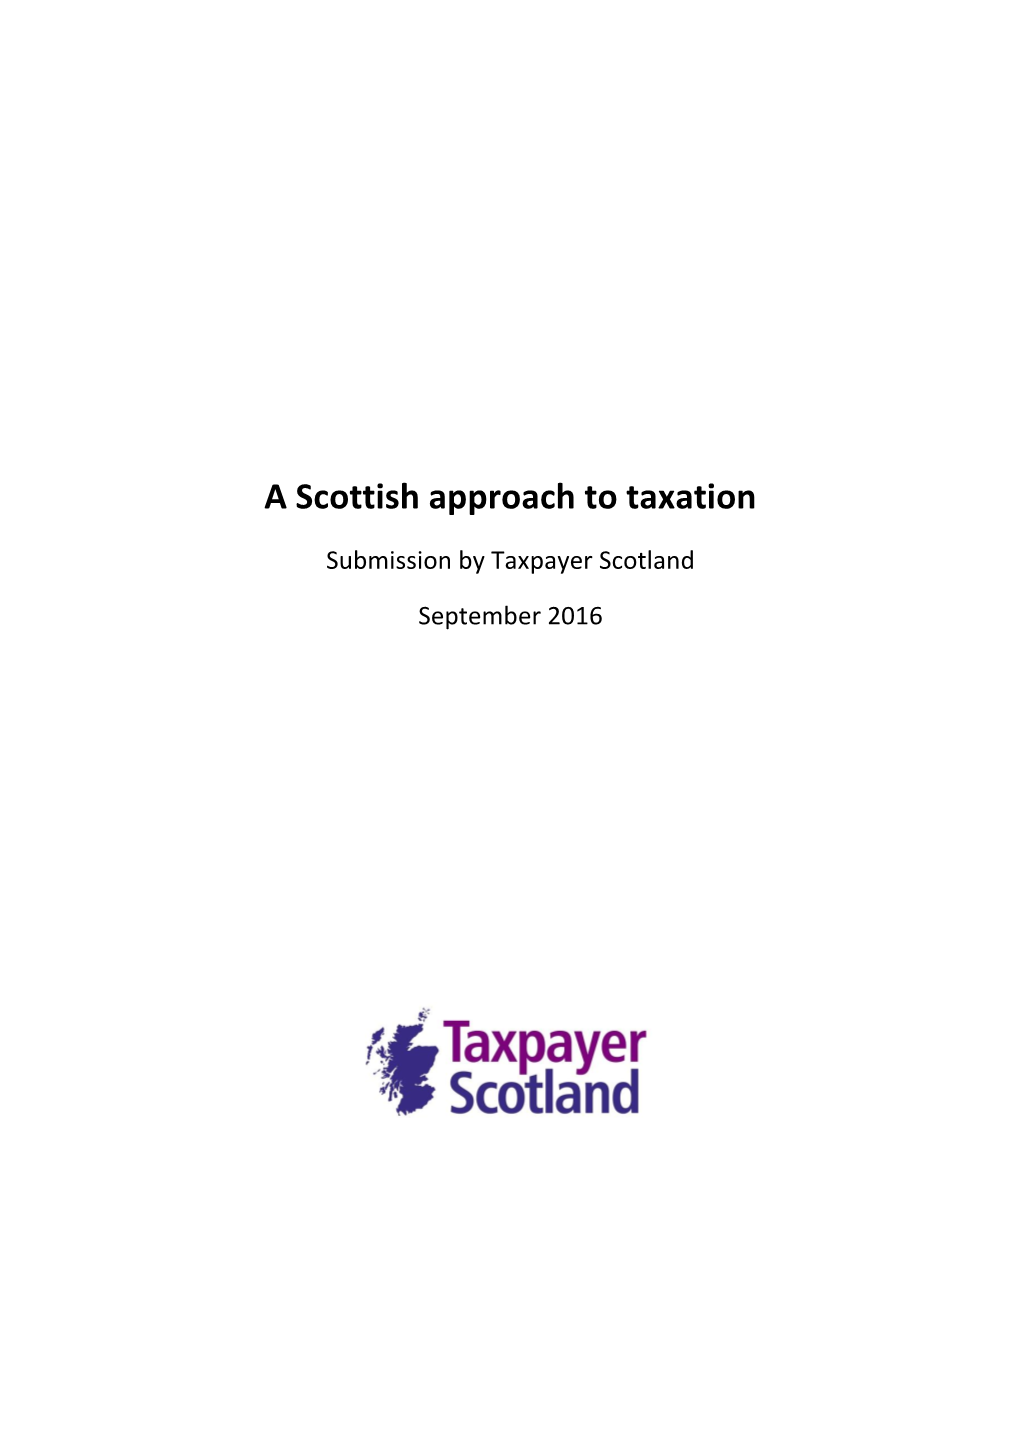 A Scottish Approach to Taxation